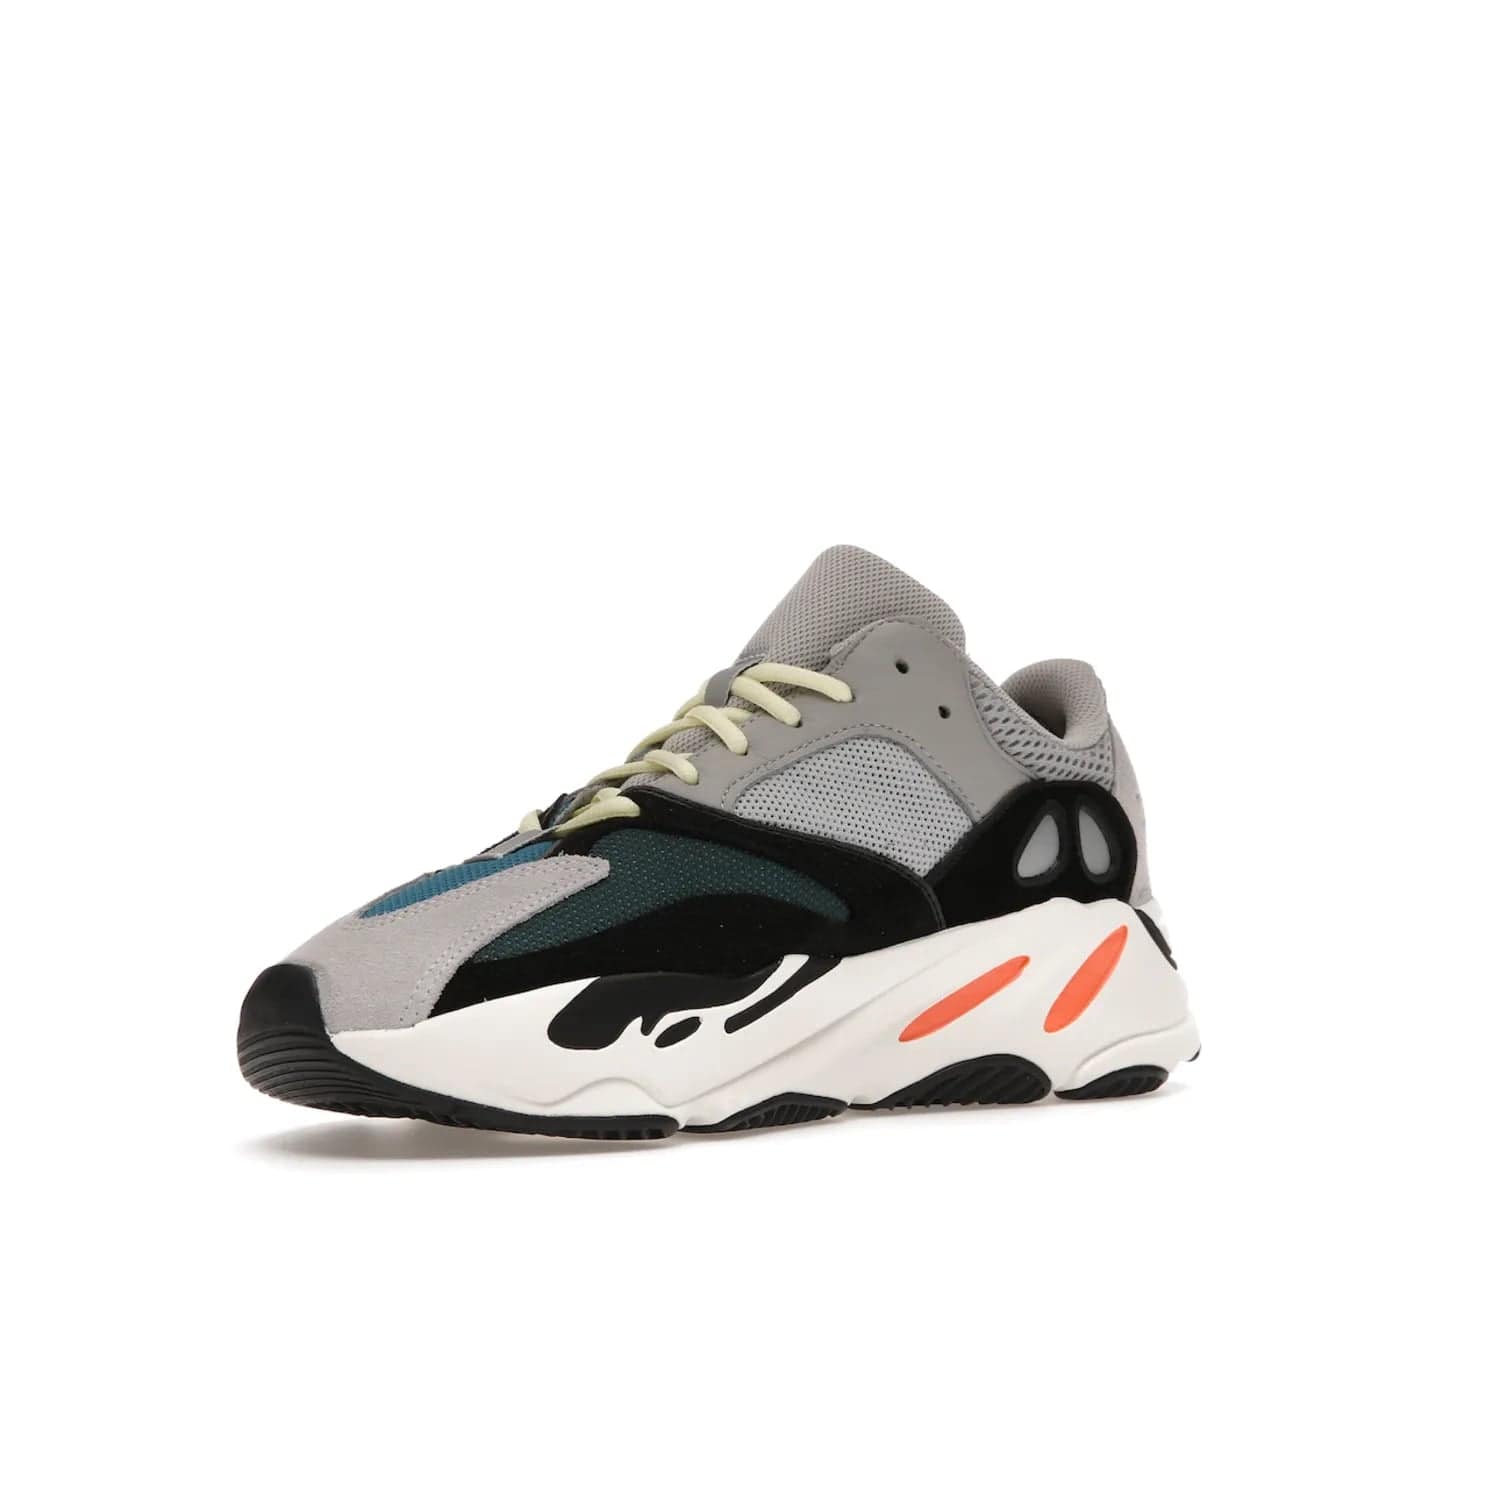 adidas Yeezy Boost 700 Wave Runner - Image 15 - Only at www.BallersClubKickz.com - Shop the iconic adidas Yeezy Boost 700 Wave Runner. Featuring grey mesh and leather upper, black suede overlays, teal mesh underlays, and signature Boost sole. Be bold & make a statement.